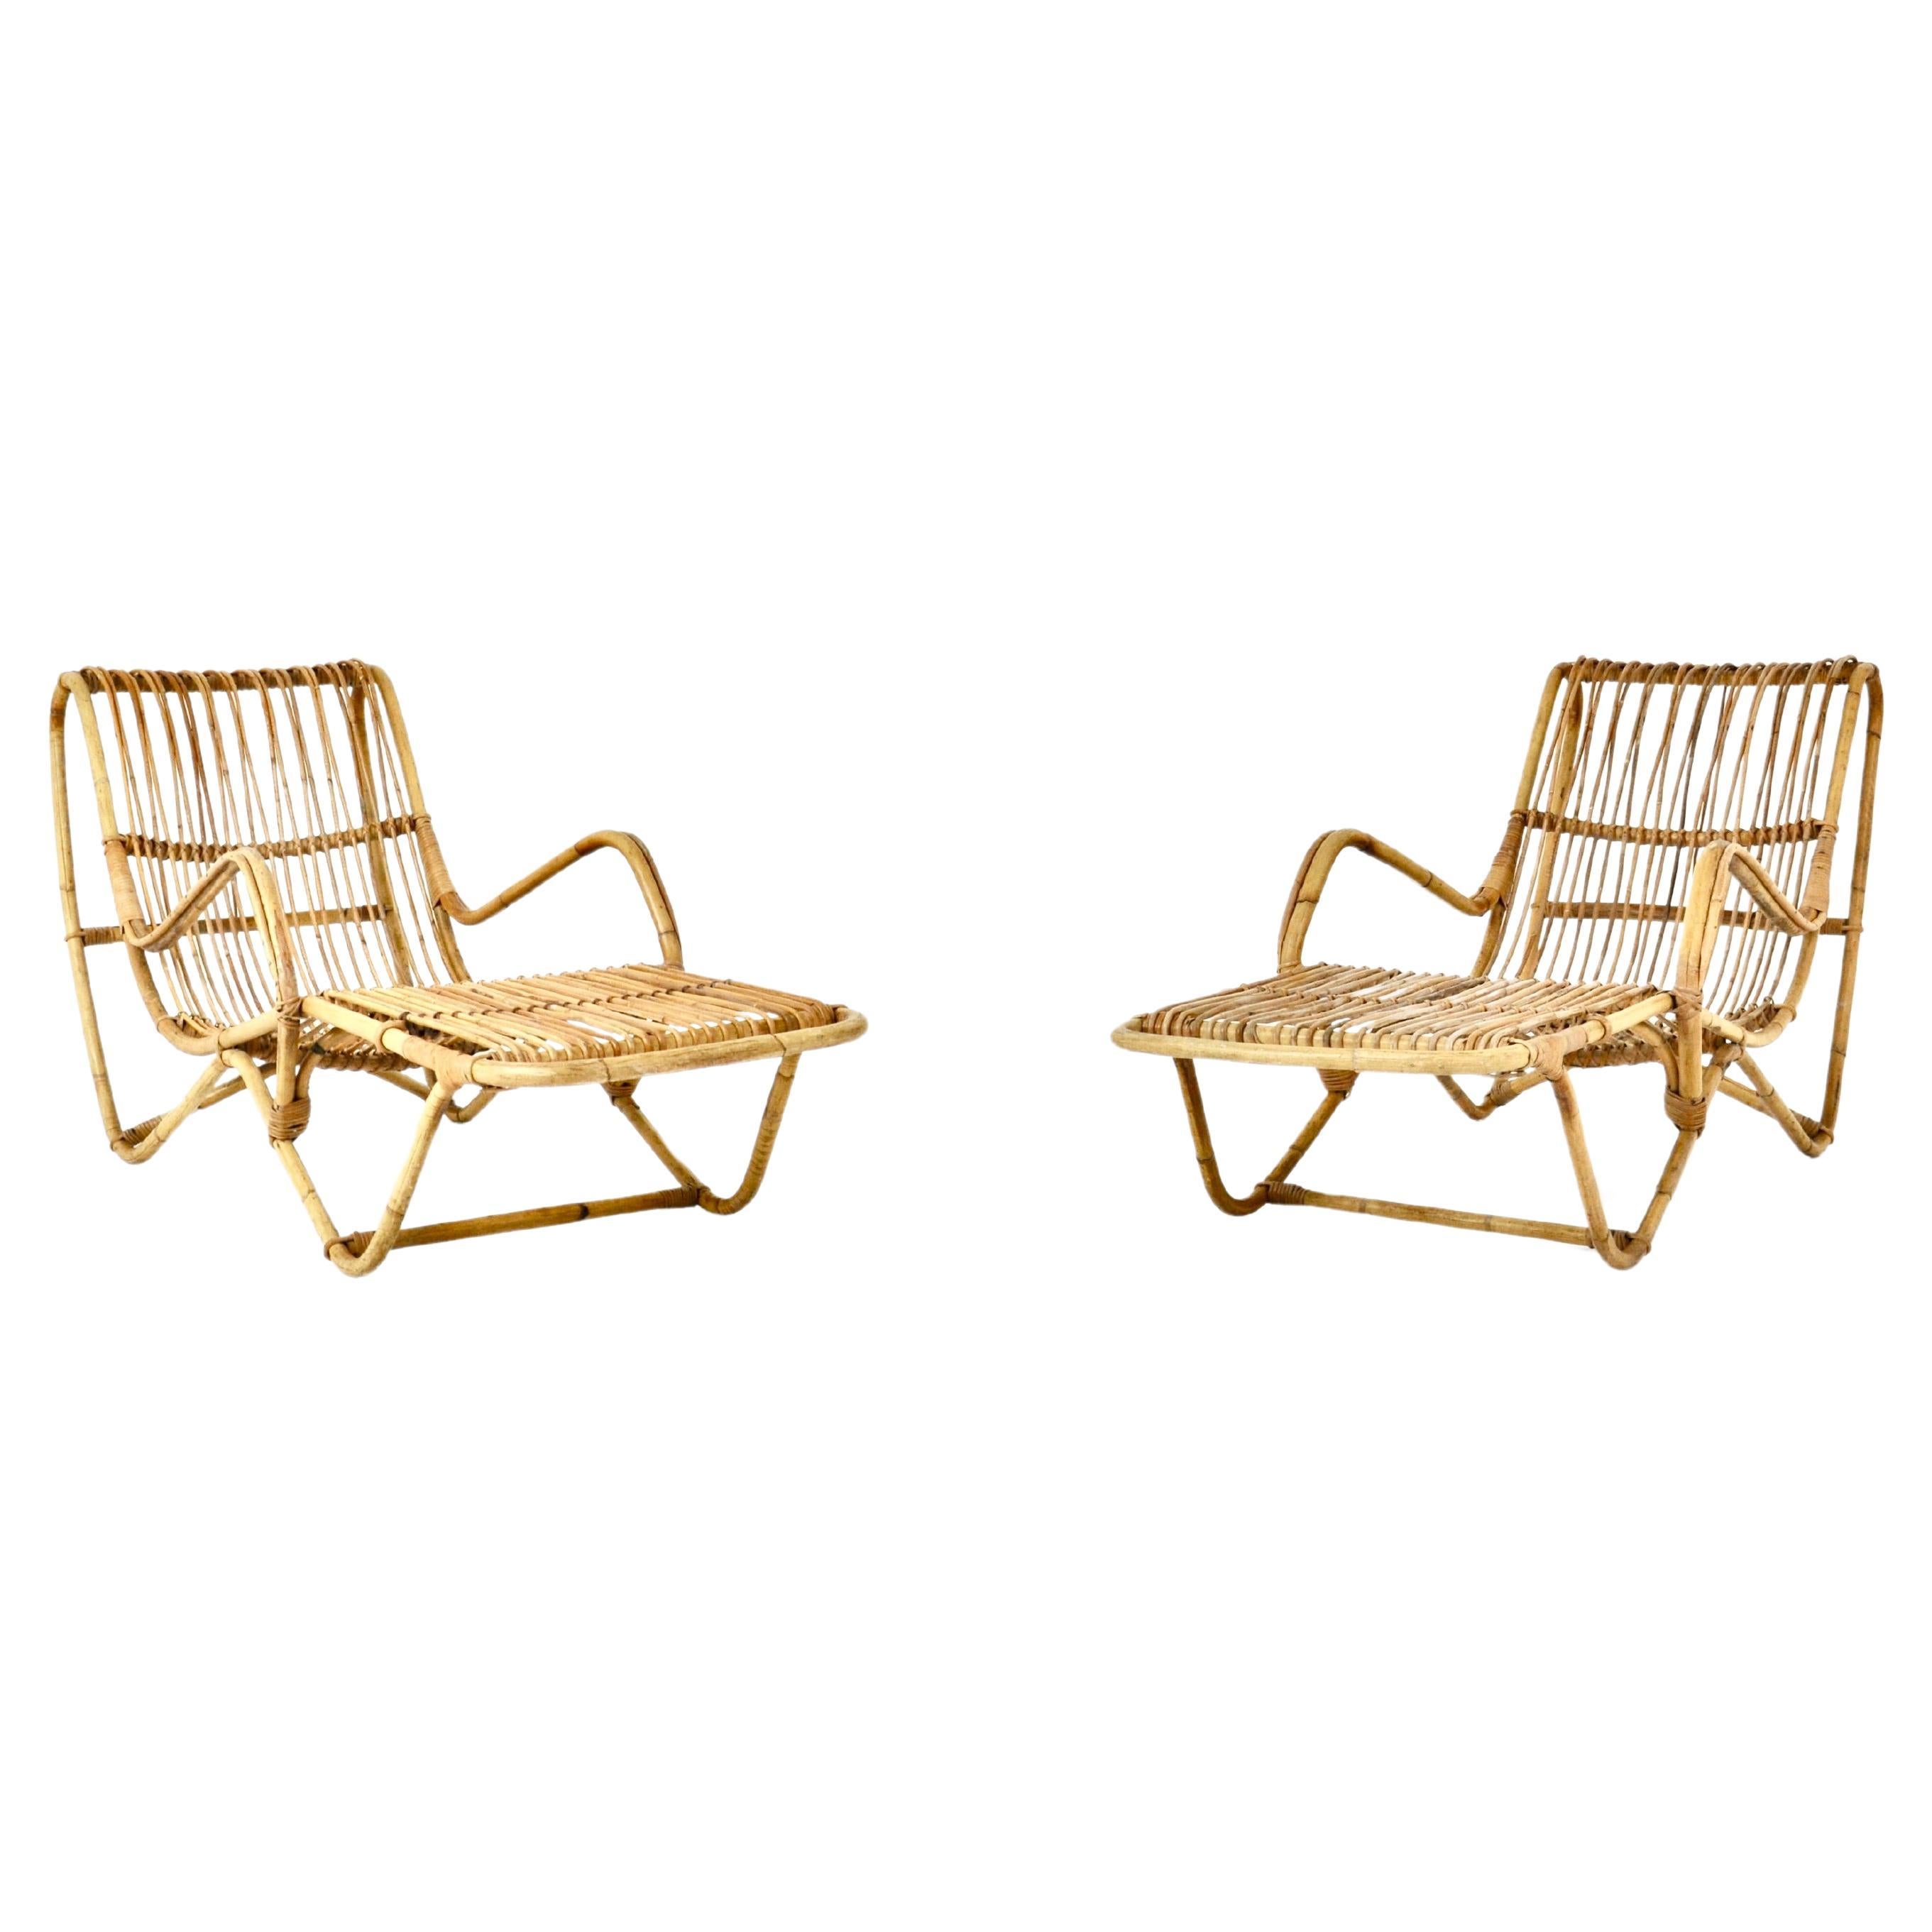 Pair of Rattan Lounge chairs, 1960s